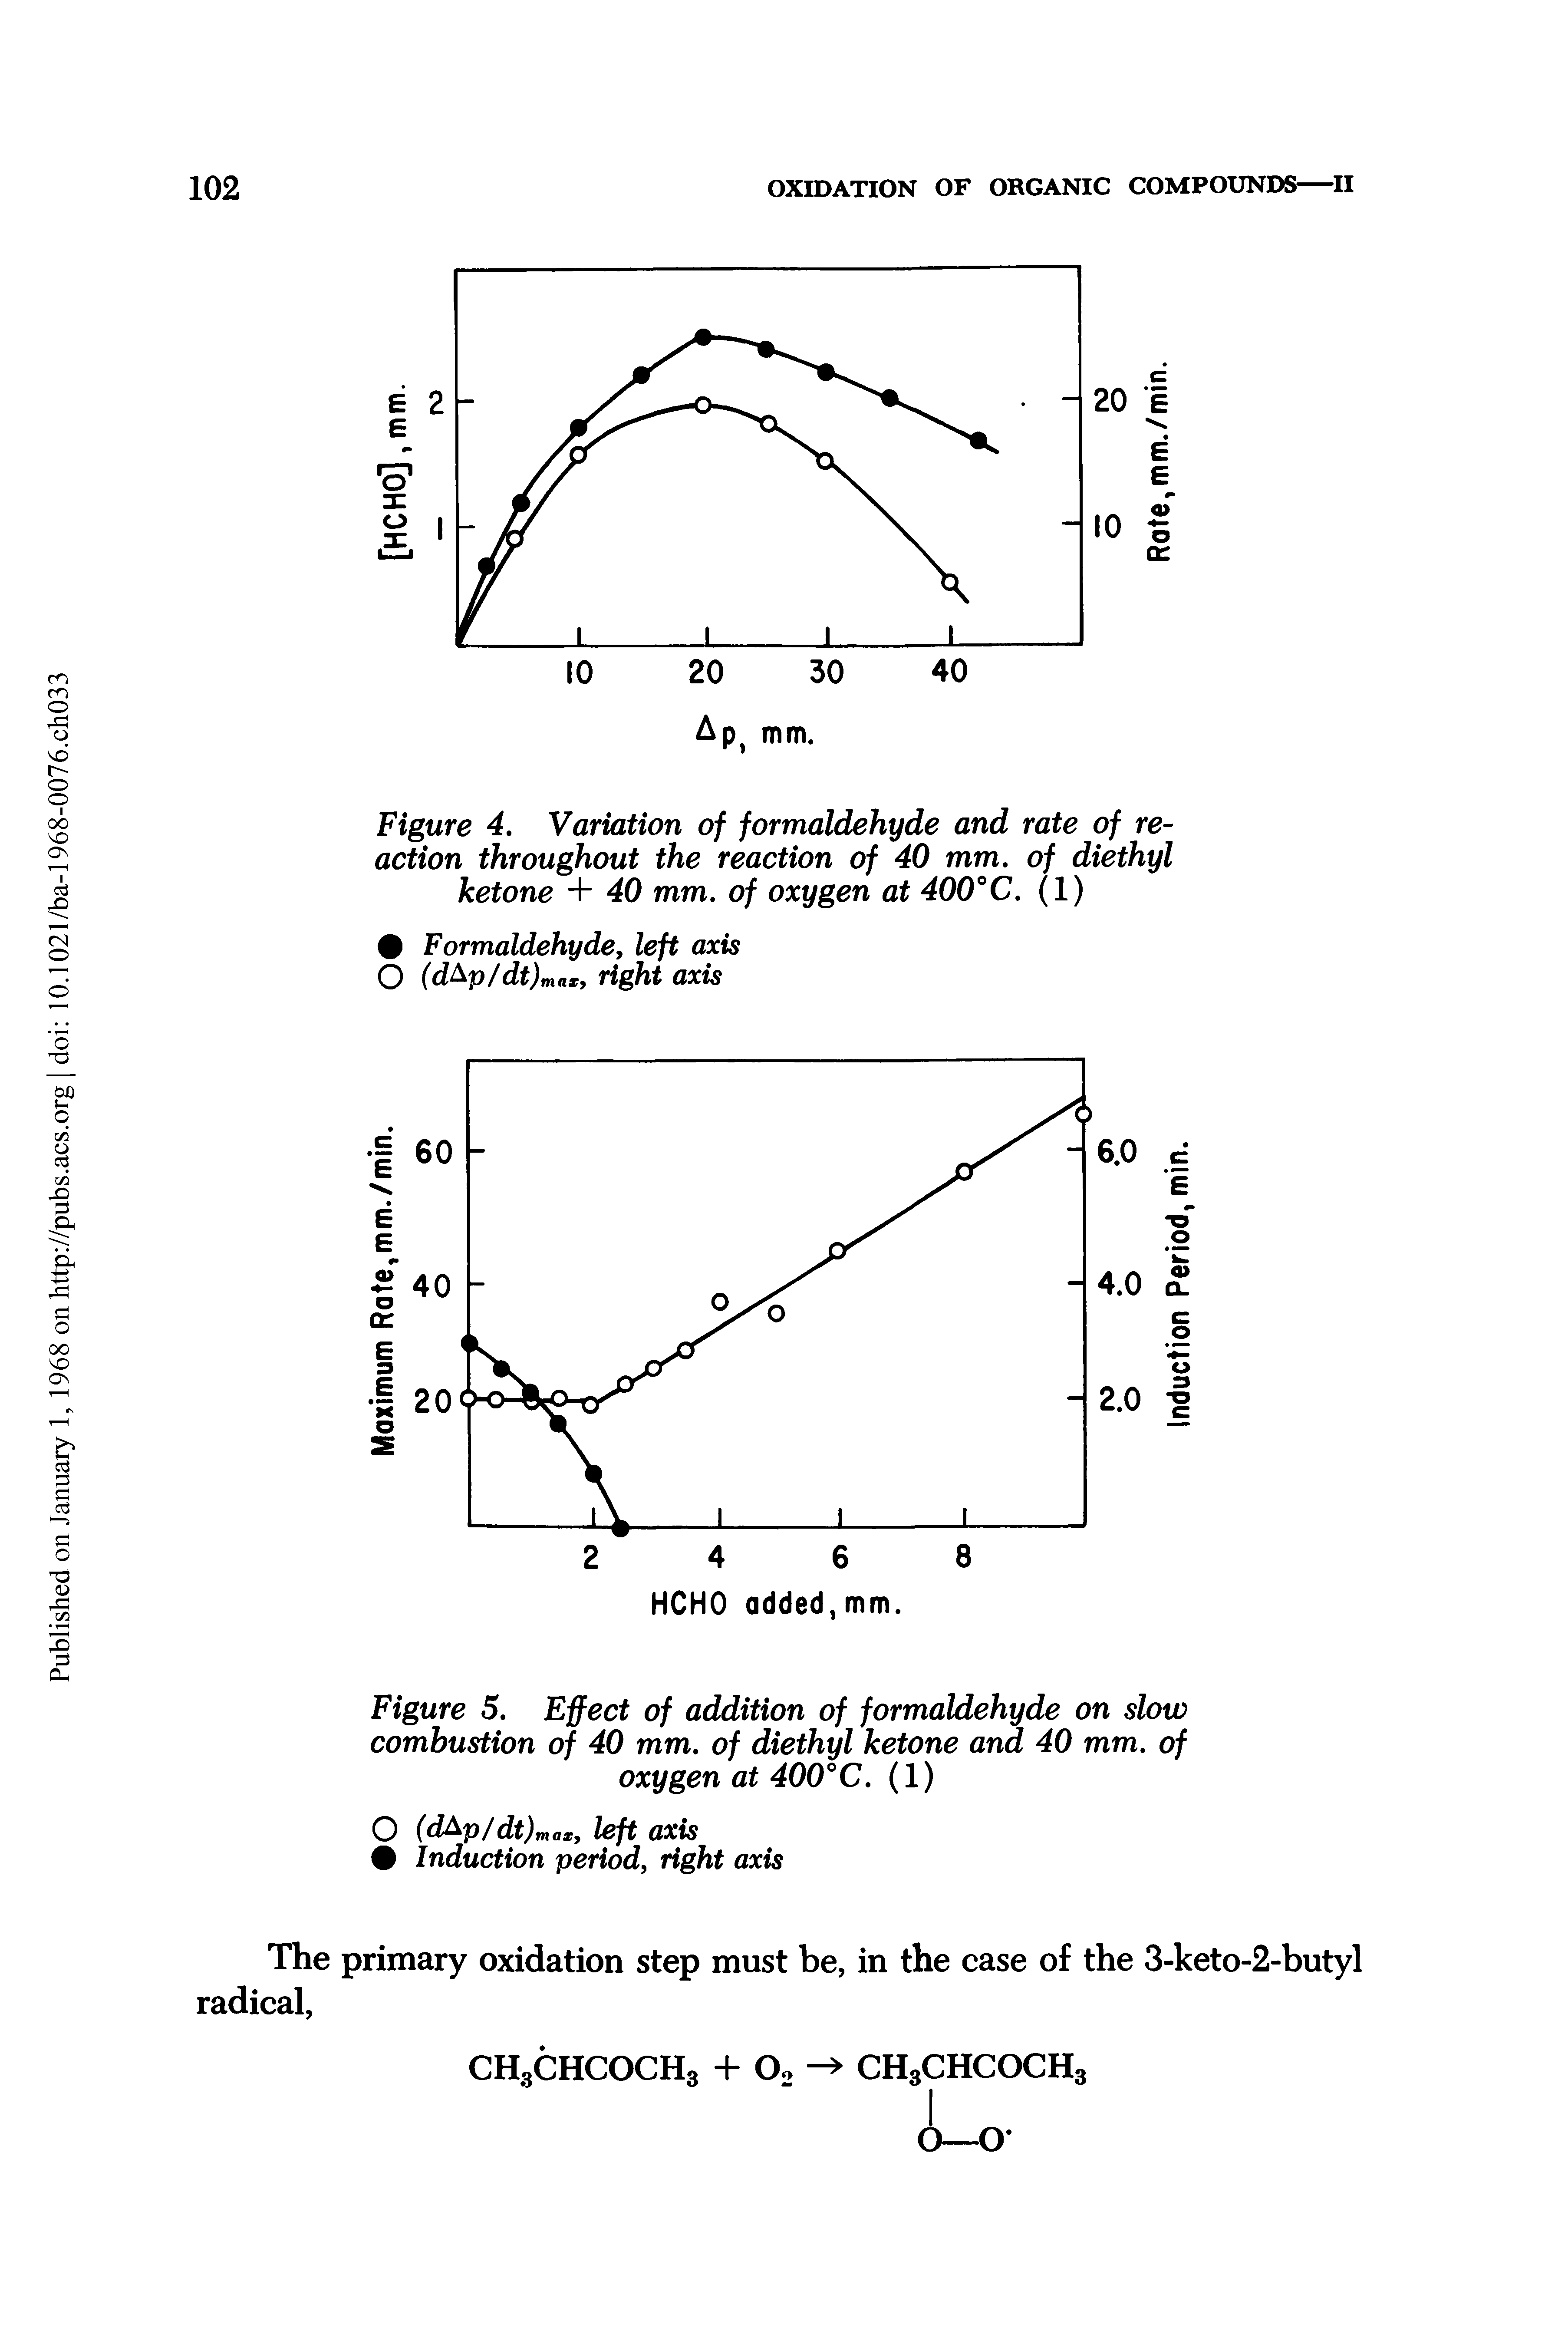 Figure 4. Variation of formaldehyde and rate of reaction throughout the reaction of 40 mm. of diethyl ketone + 40 mm. of oxygen at 400°C. (1)...